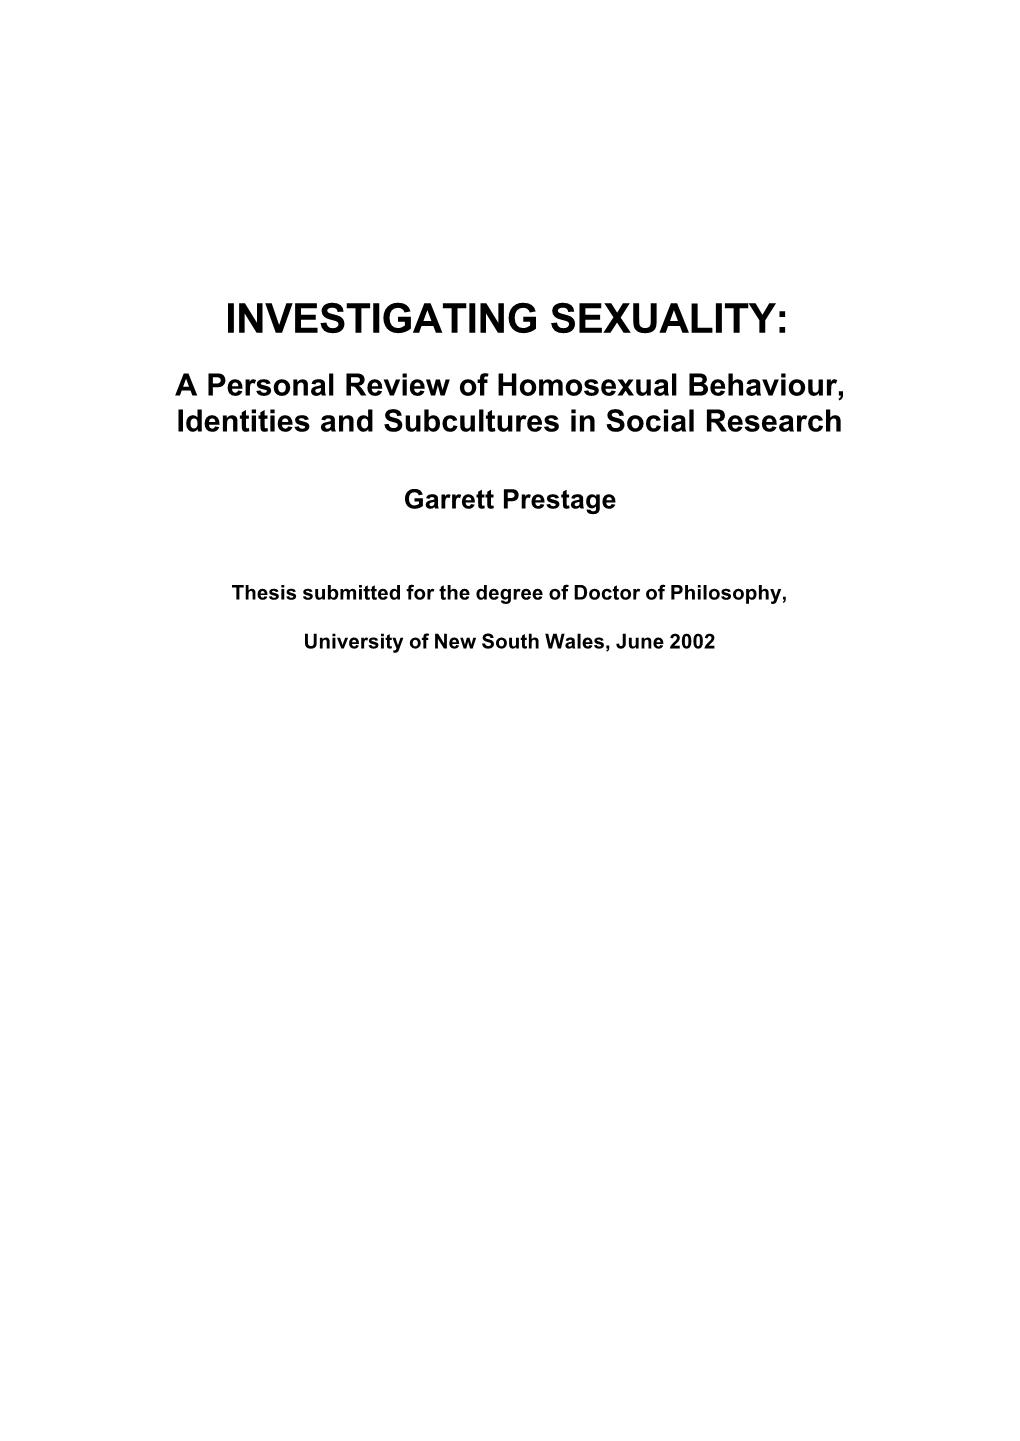 INVESTIGATING SEXUALITY: a Personal Review of Homosexual Behaviour, Identities and Subcultures in Social Research